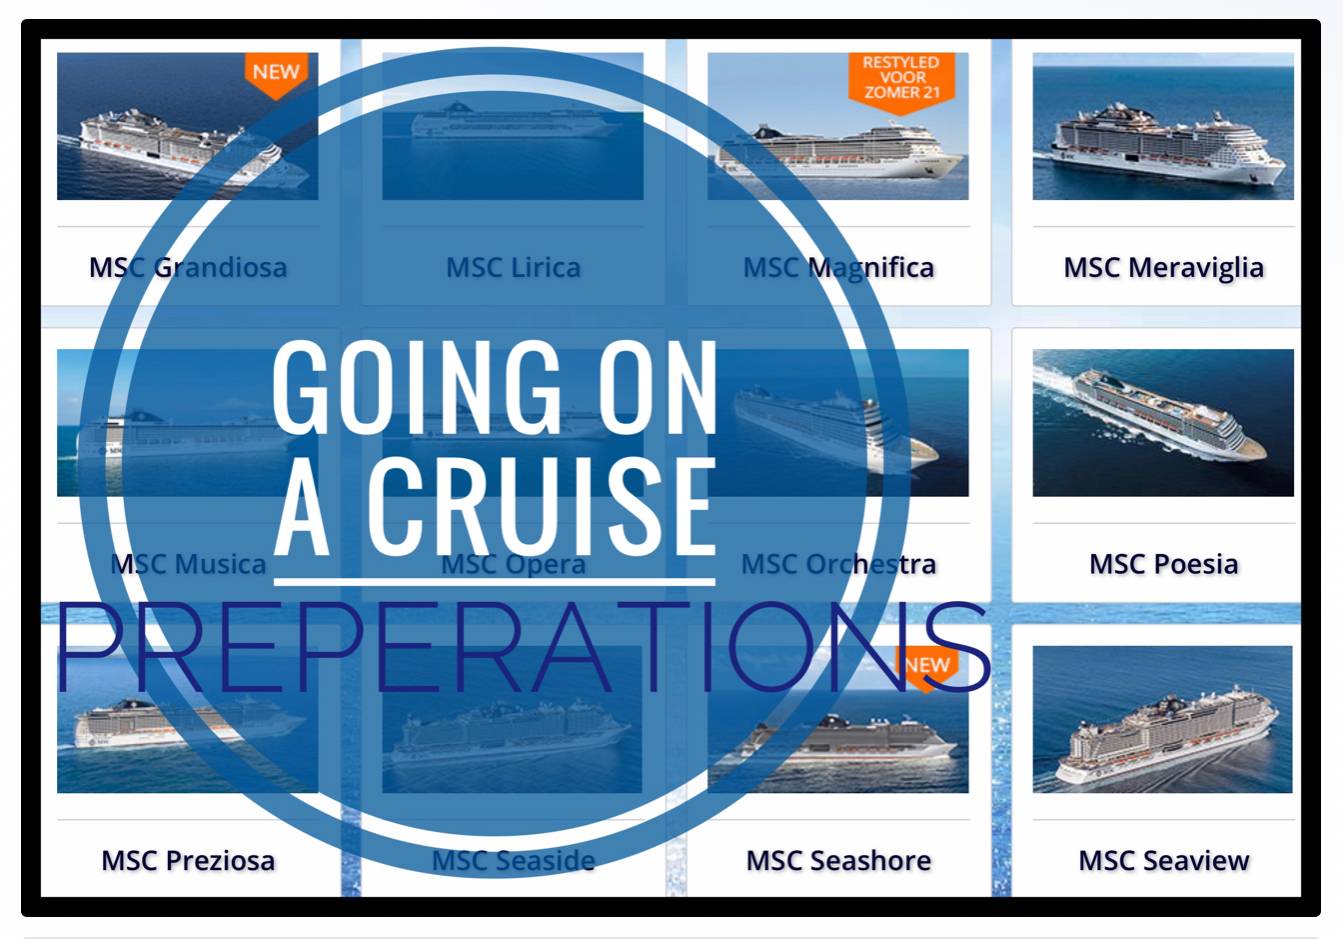 # source : my personal cruise ticket and app